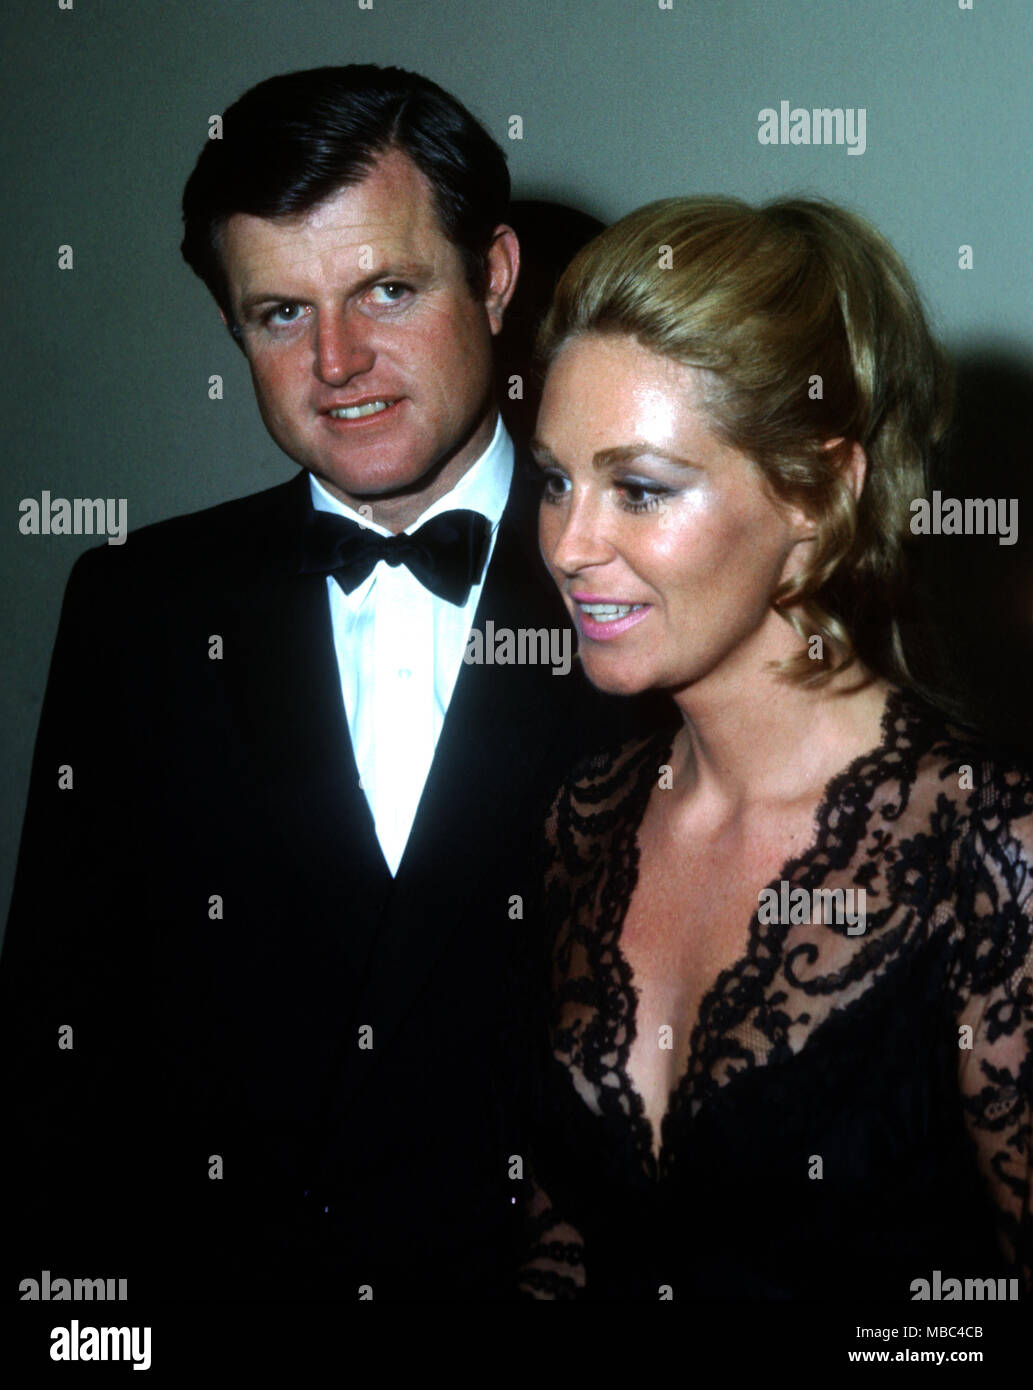 Joan kennedy hi-res stock photography and images - Alamy